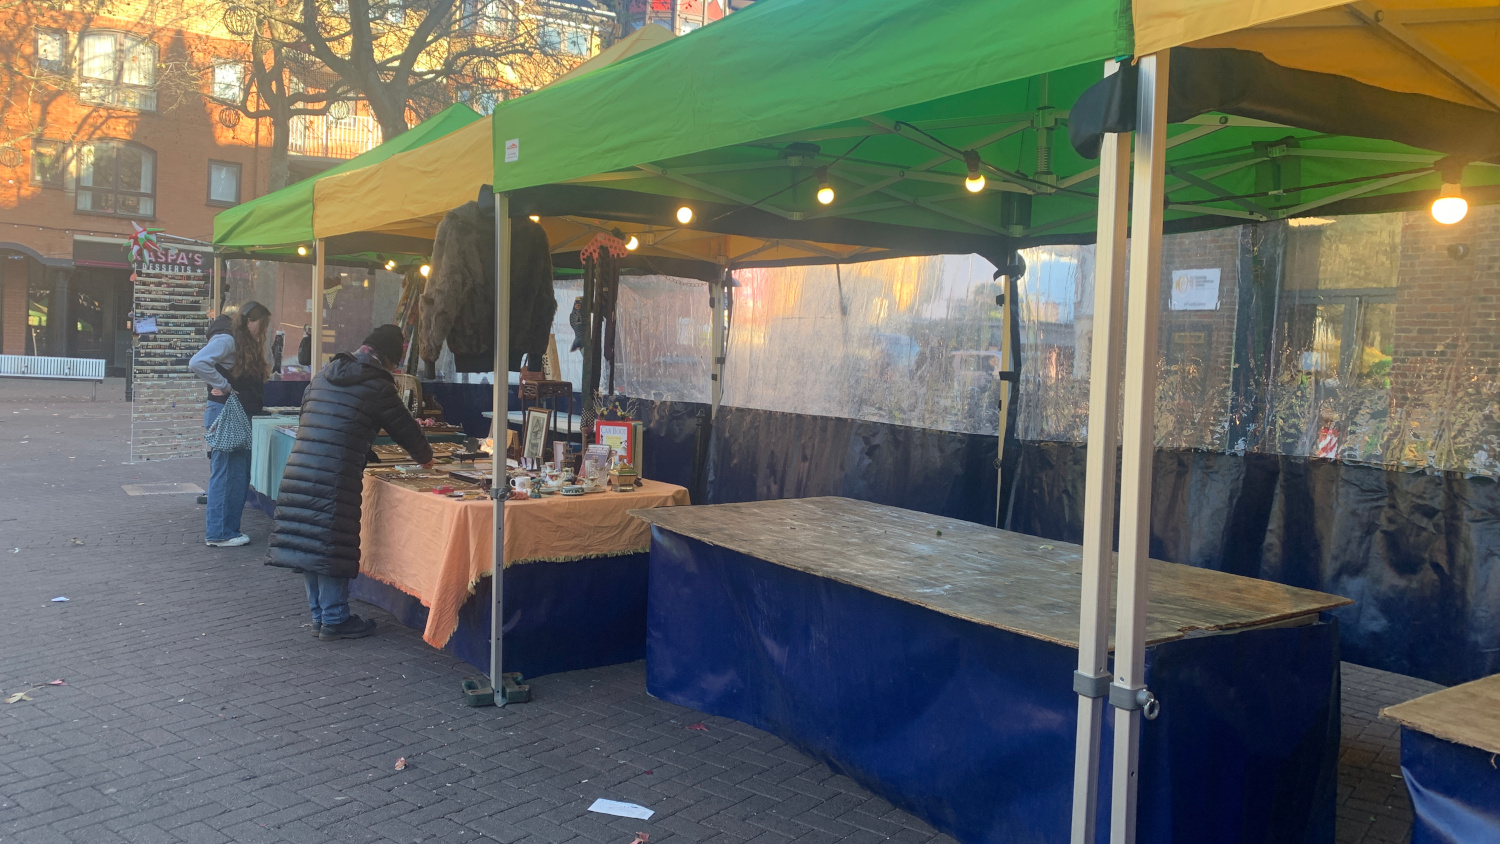 <p>On Wednesdays, Thursdays and Fridays there are often empty stalls</p>